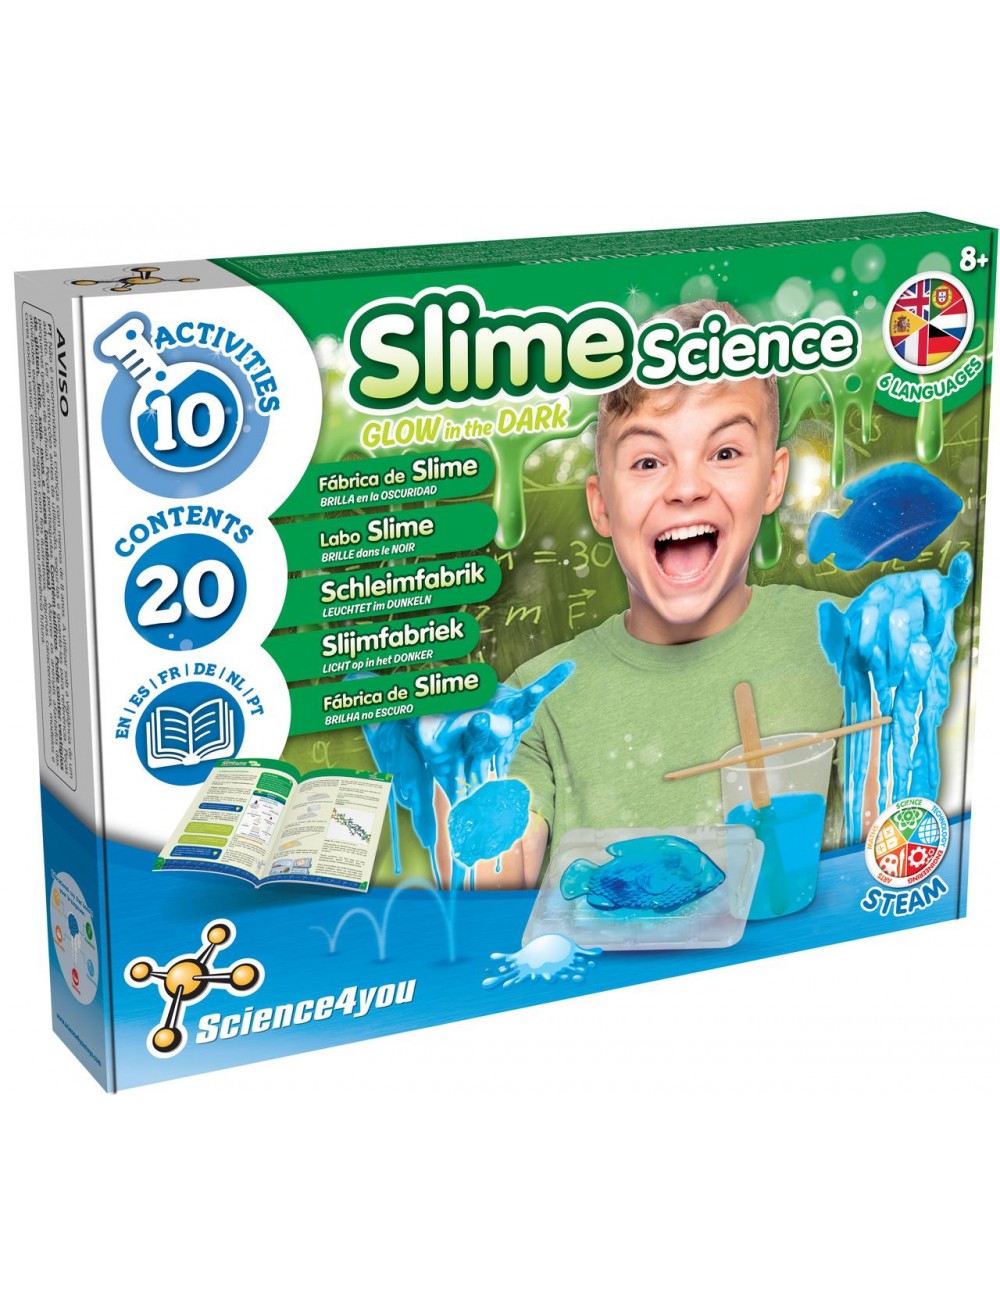 Slime Science GID - Multi-language | Science Toys for Children Aged 8+ |  Science4you